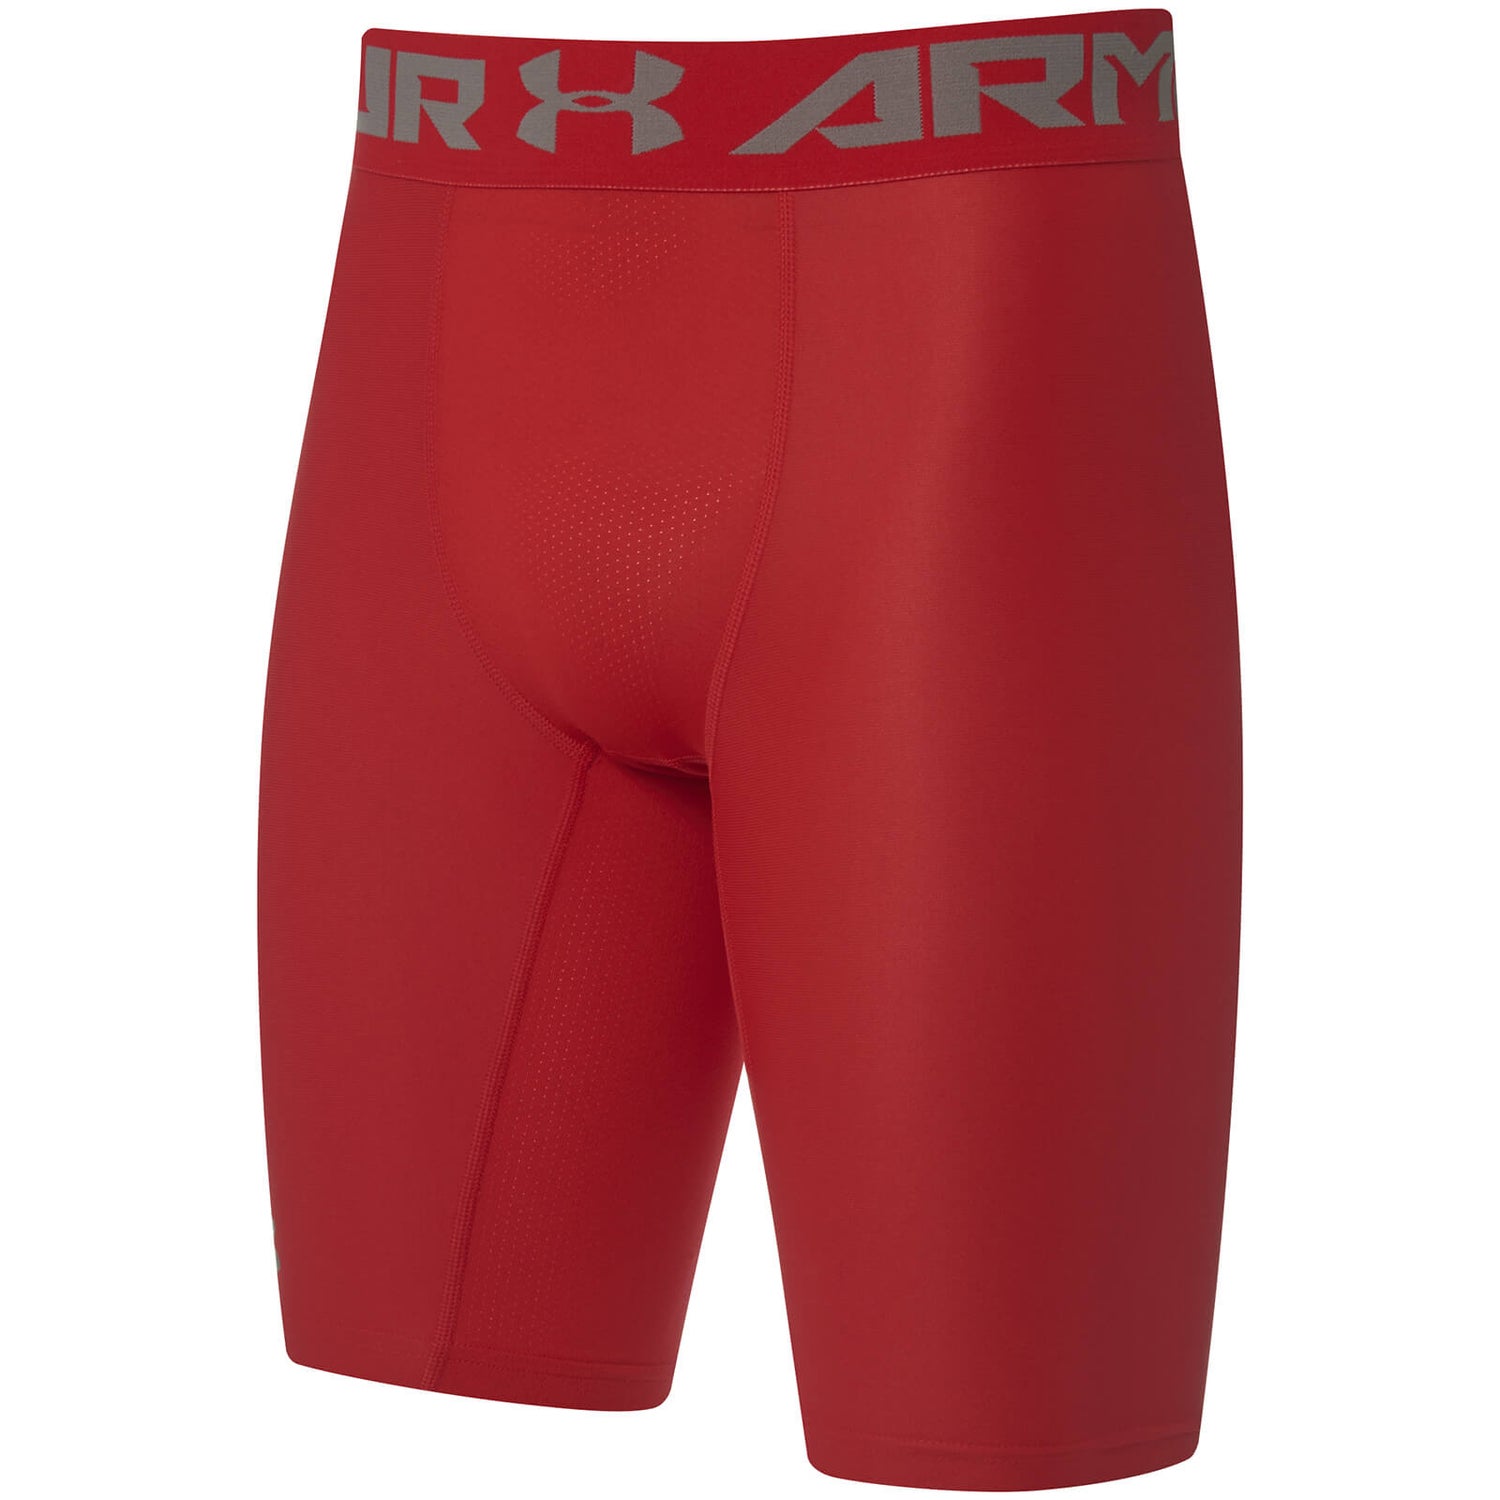 Under Armour Men's HeatGear Armour Long Compression Shorts - Red